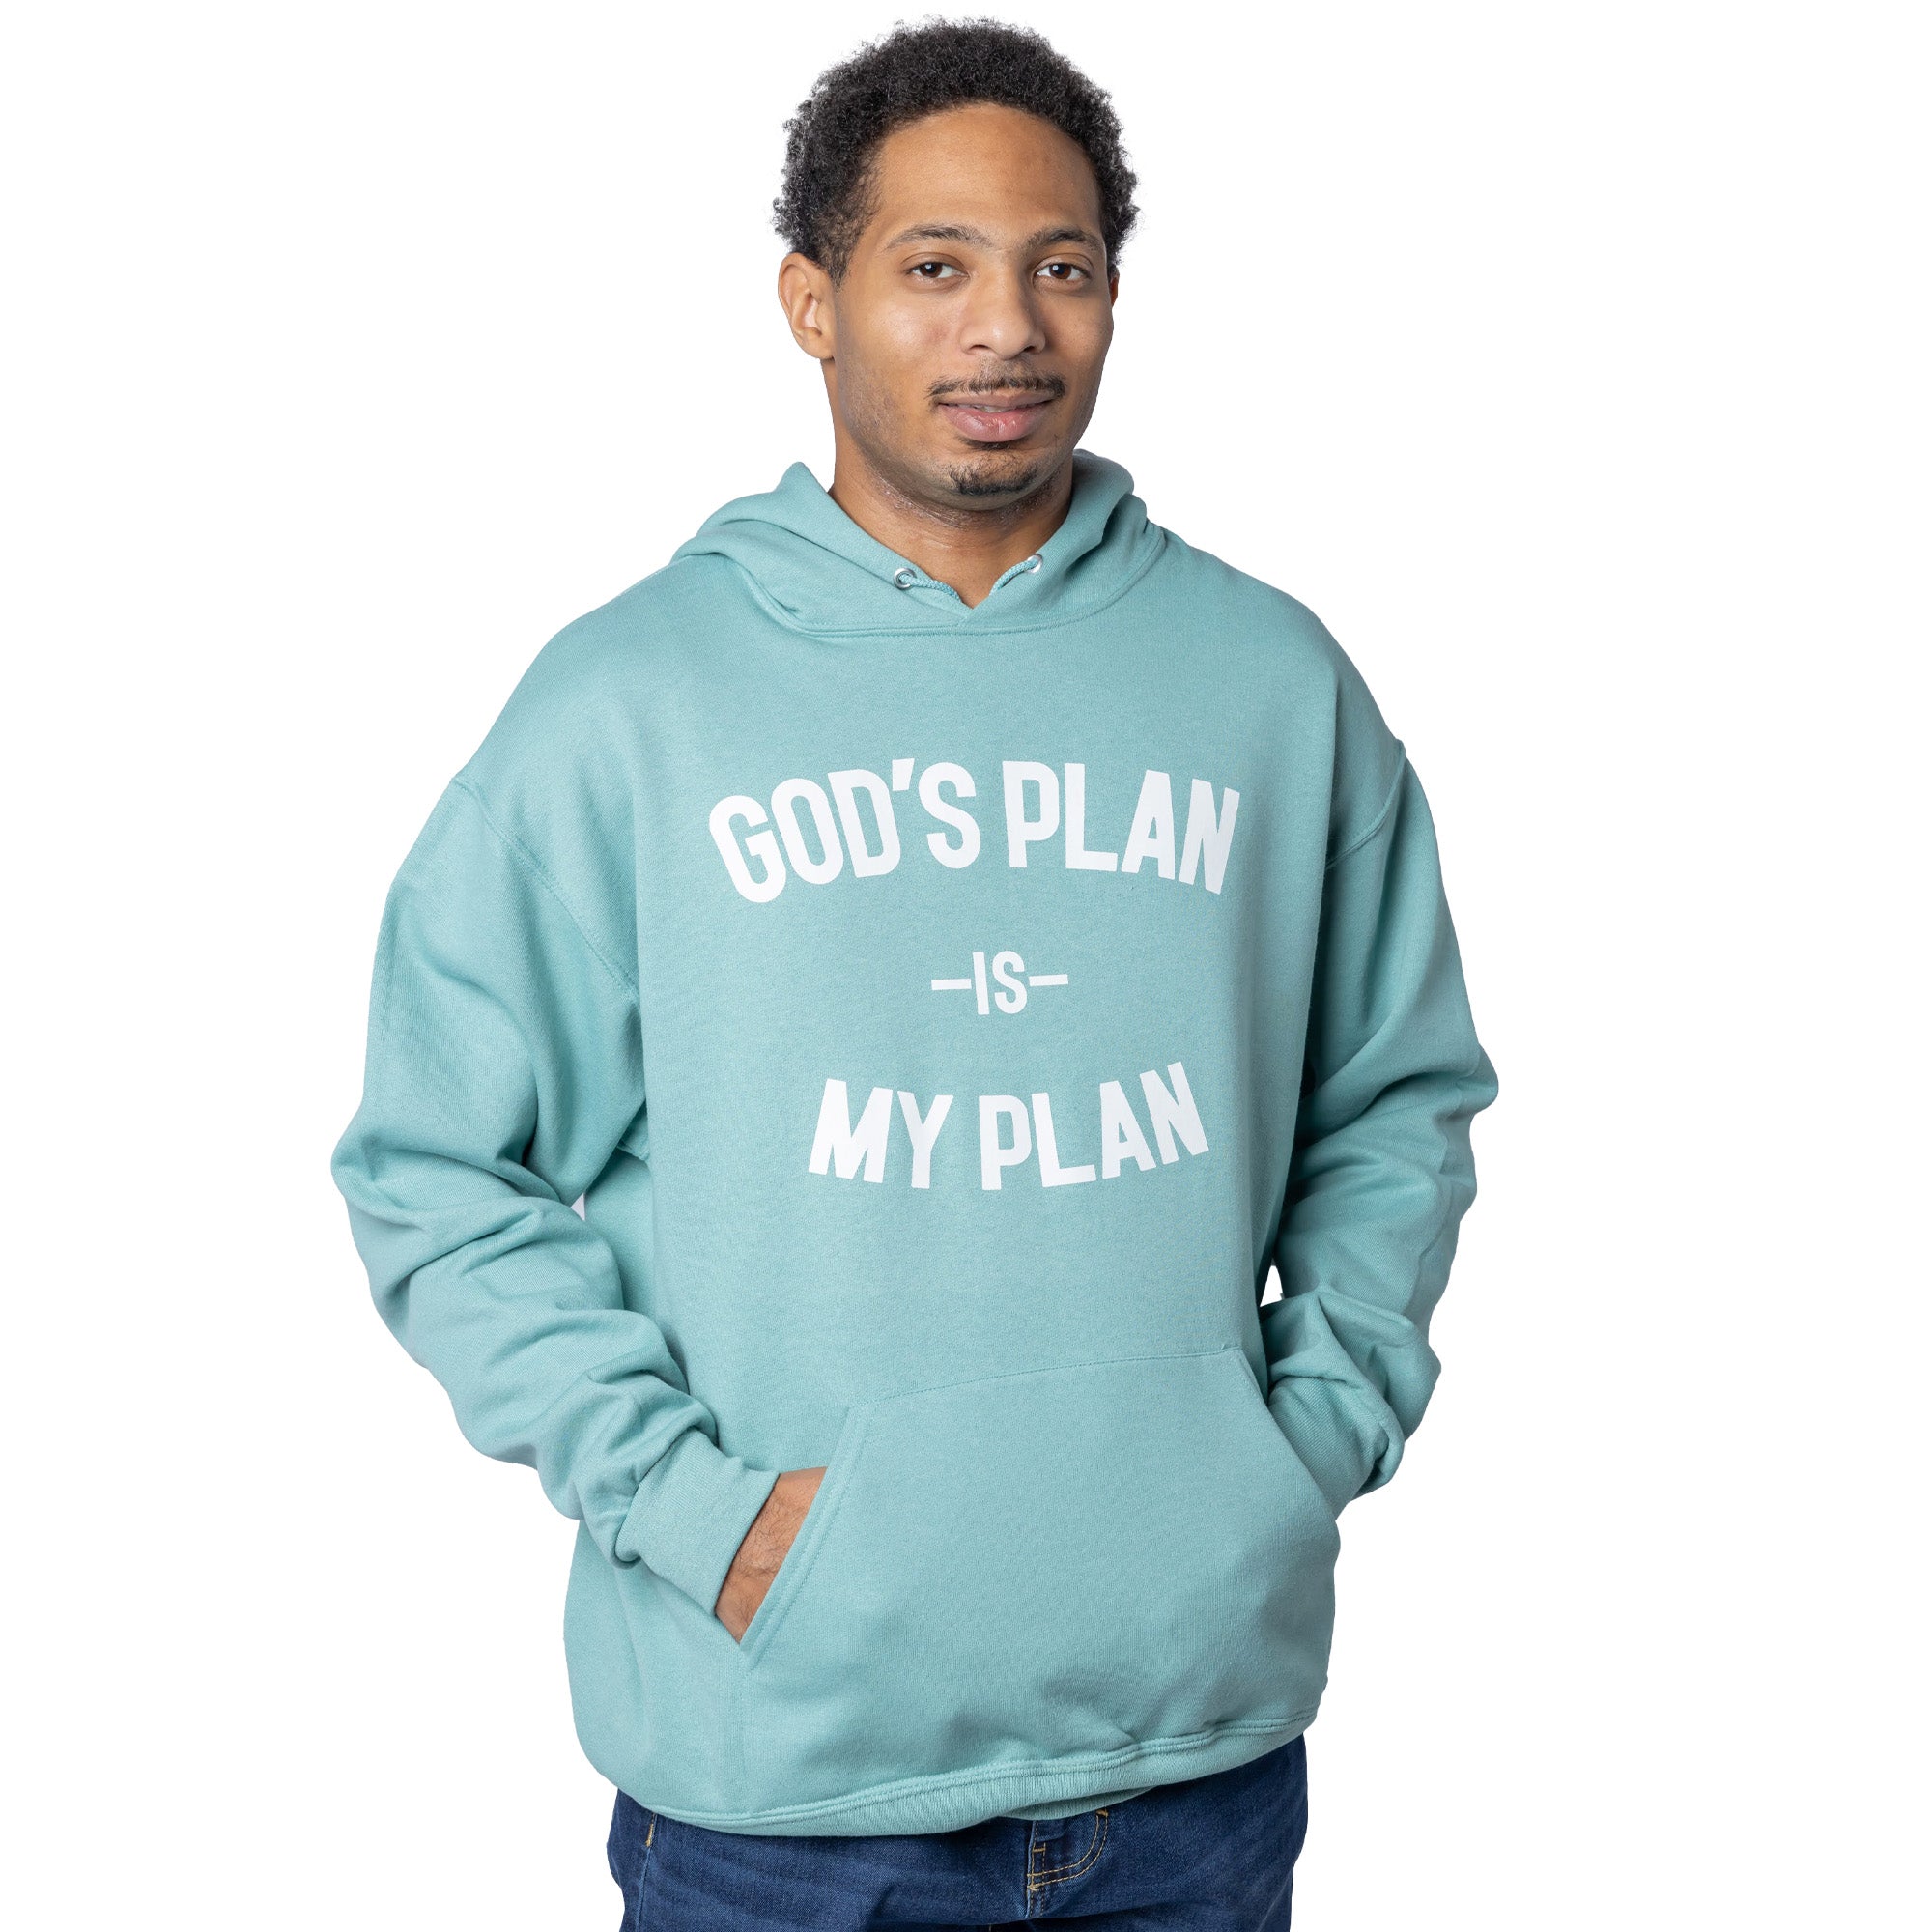 God's Plan My Plan , Used By God, Used By God Clothing, Christian Apparel, Christian Hoodies, Christian Clothing, Christian Shirts, God Shirts, Christian Sweatshirts, God Clothing, Jesus Hoodie, christian clothing t shirts, Jesus Clothes, t-shirts about jesus, hoodies near me, Christian Tshirts, God Is Dope, Art Of Homage, Red Letter Clothing, Elevated Faith, Active Faith Sports, Beacon Threads, God The Father Apparel